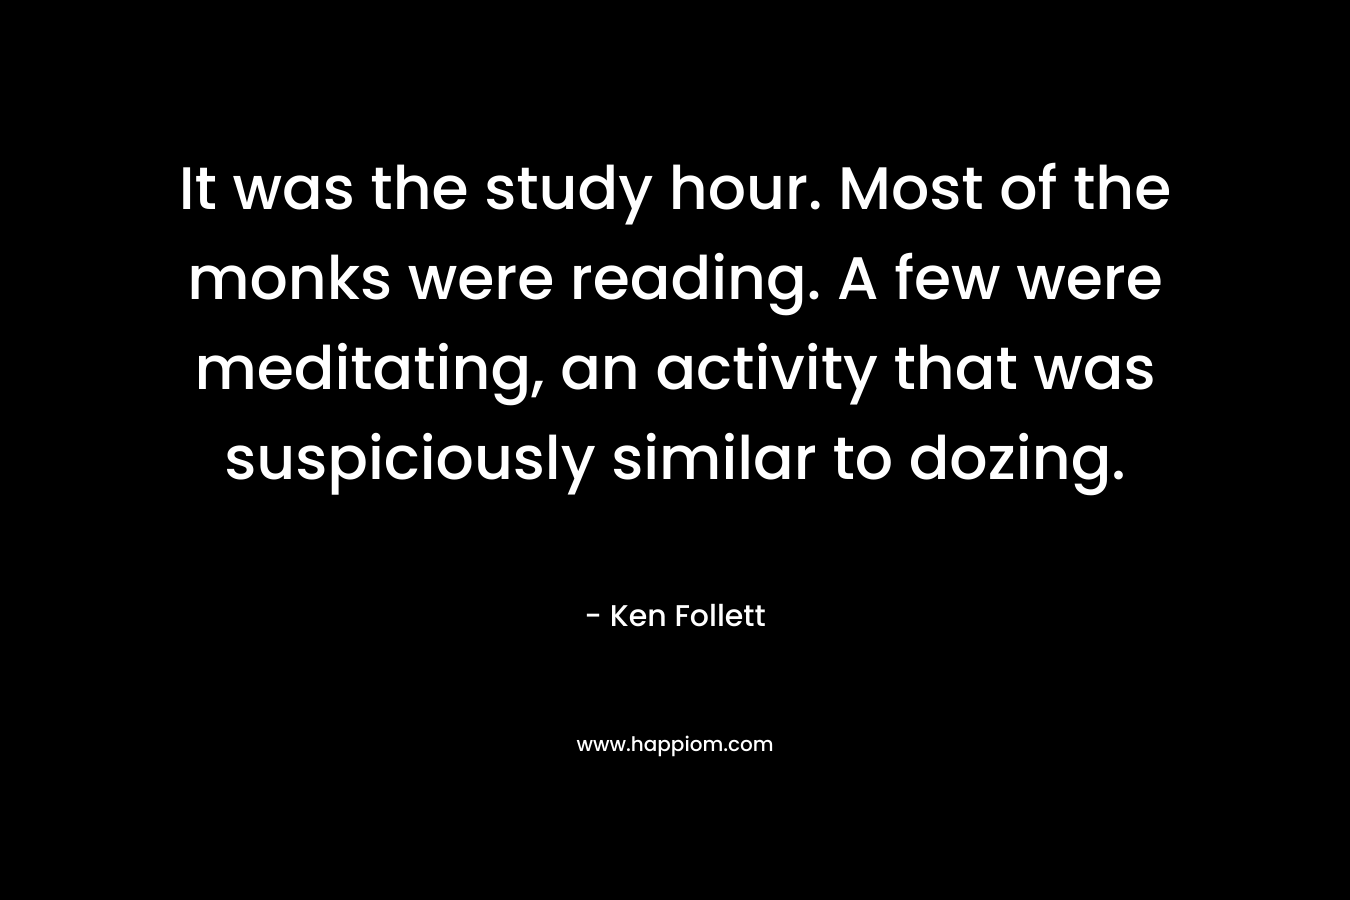 It was the study hour. Most of the monks were reading. A few were meditating, an activity that was suspiciously similar to dozing. – Ken Follett